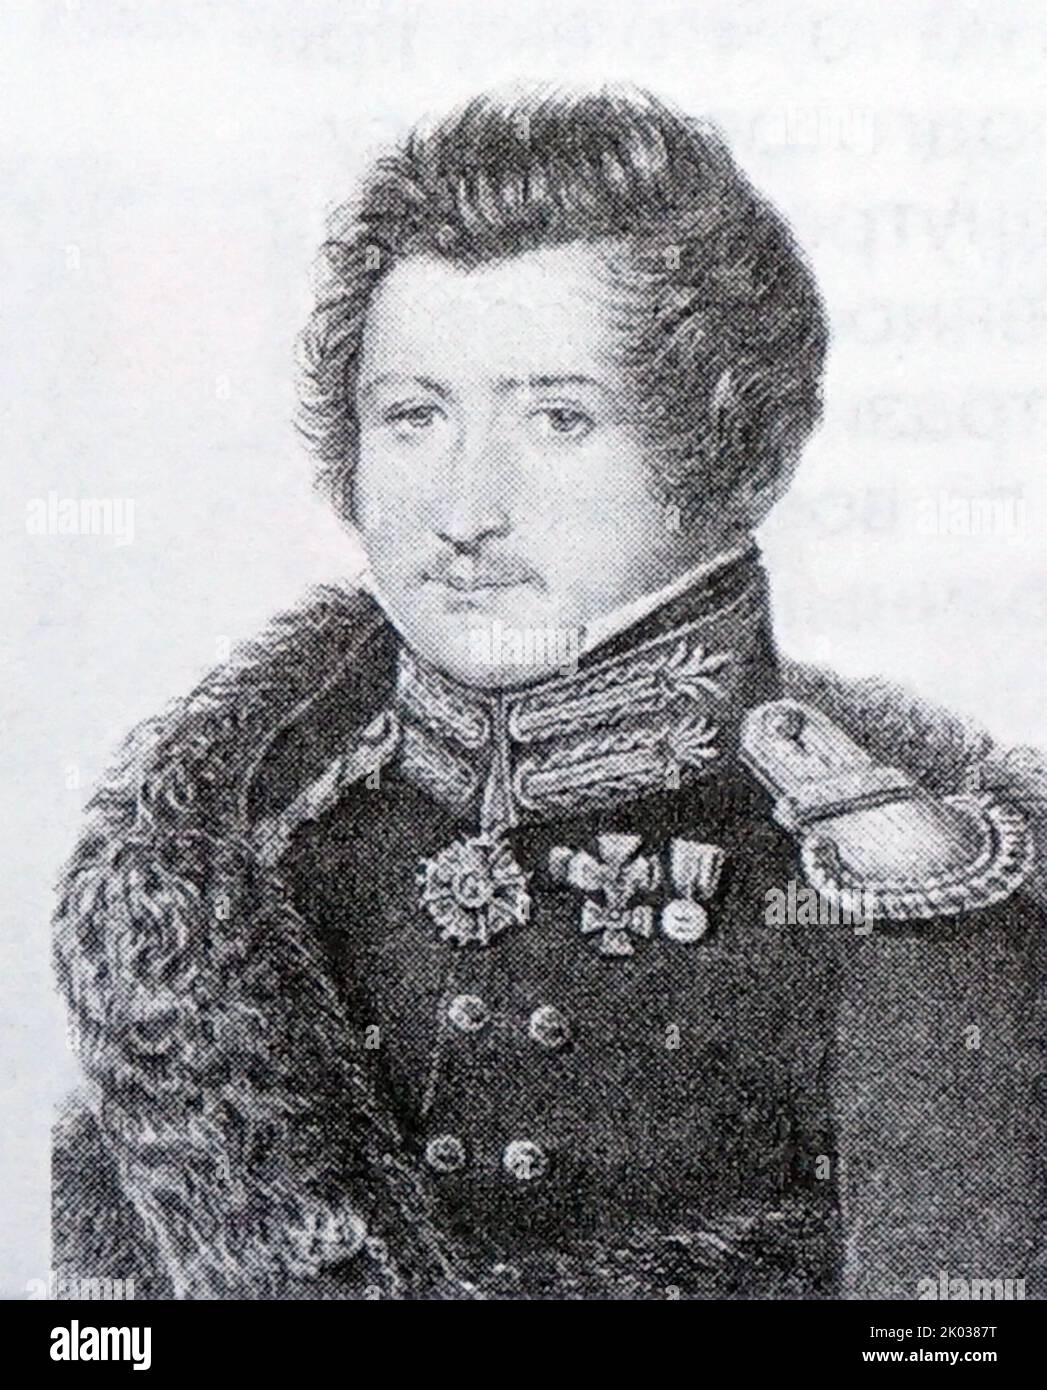 A member of the Decembrist movement. The Decembrist Revolt took place in Russia on 26 December 1825, during the interregnum following the sudden death of Tsar Alexander I Stock Photo